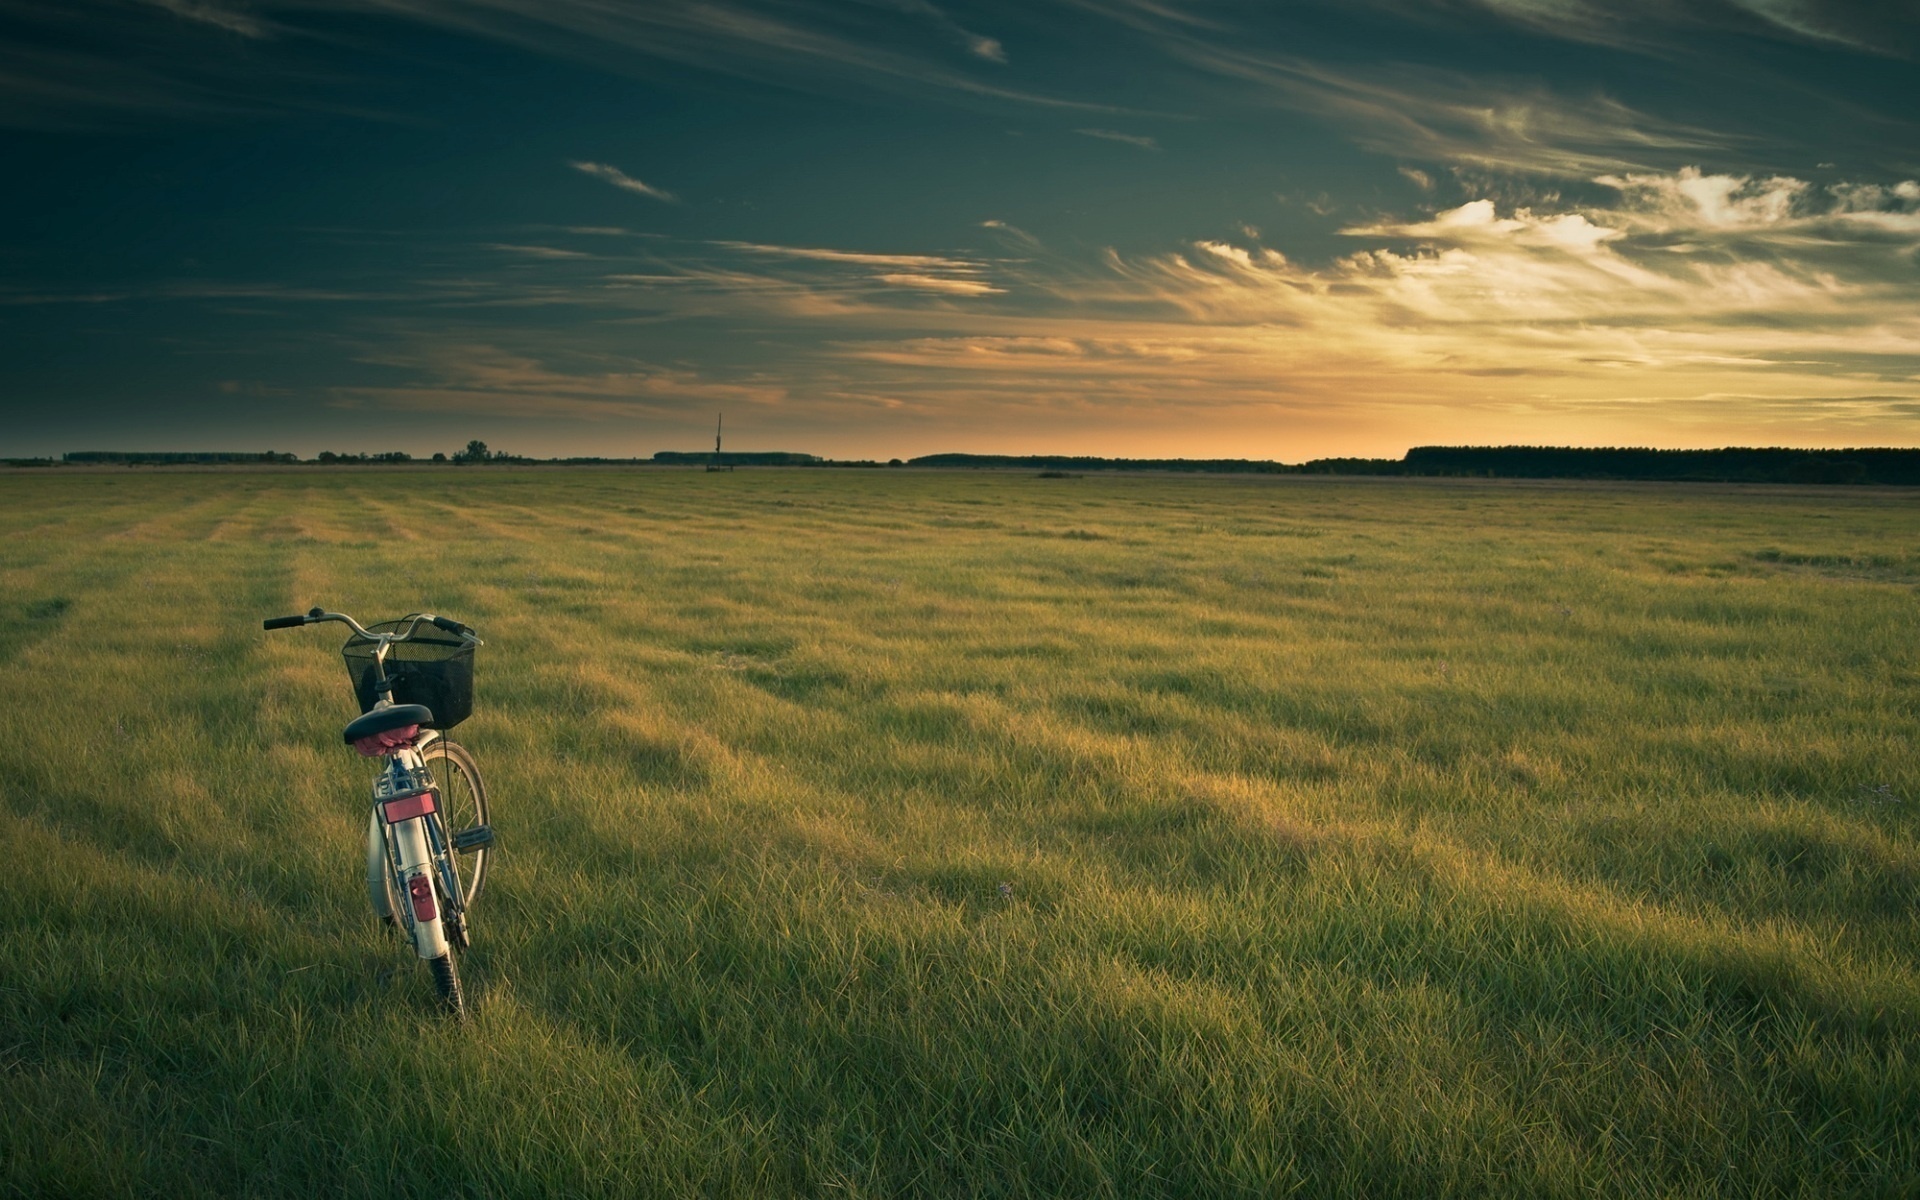 A Bicycle on an Empty Green Field